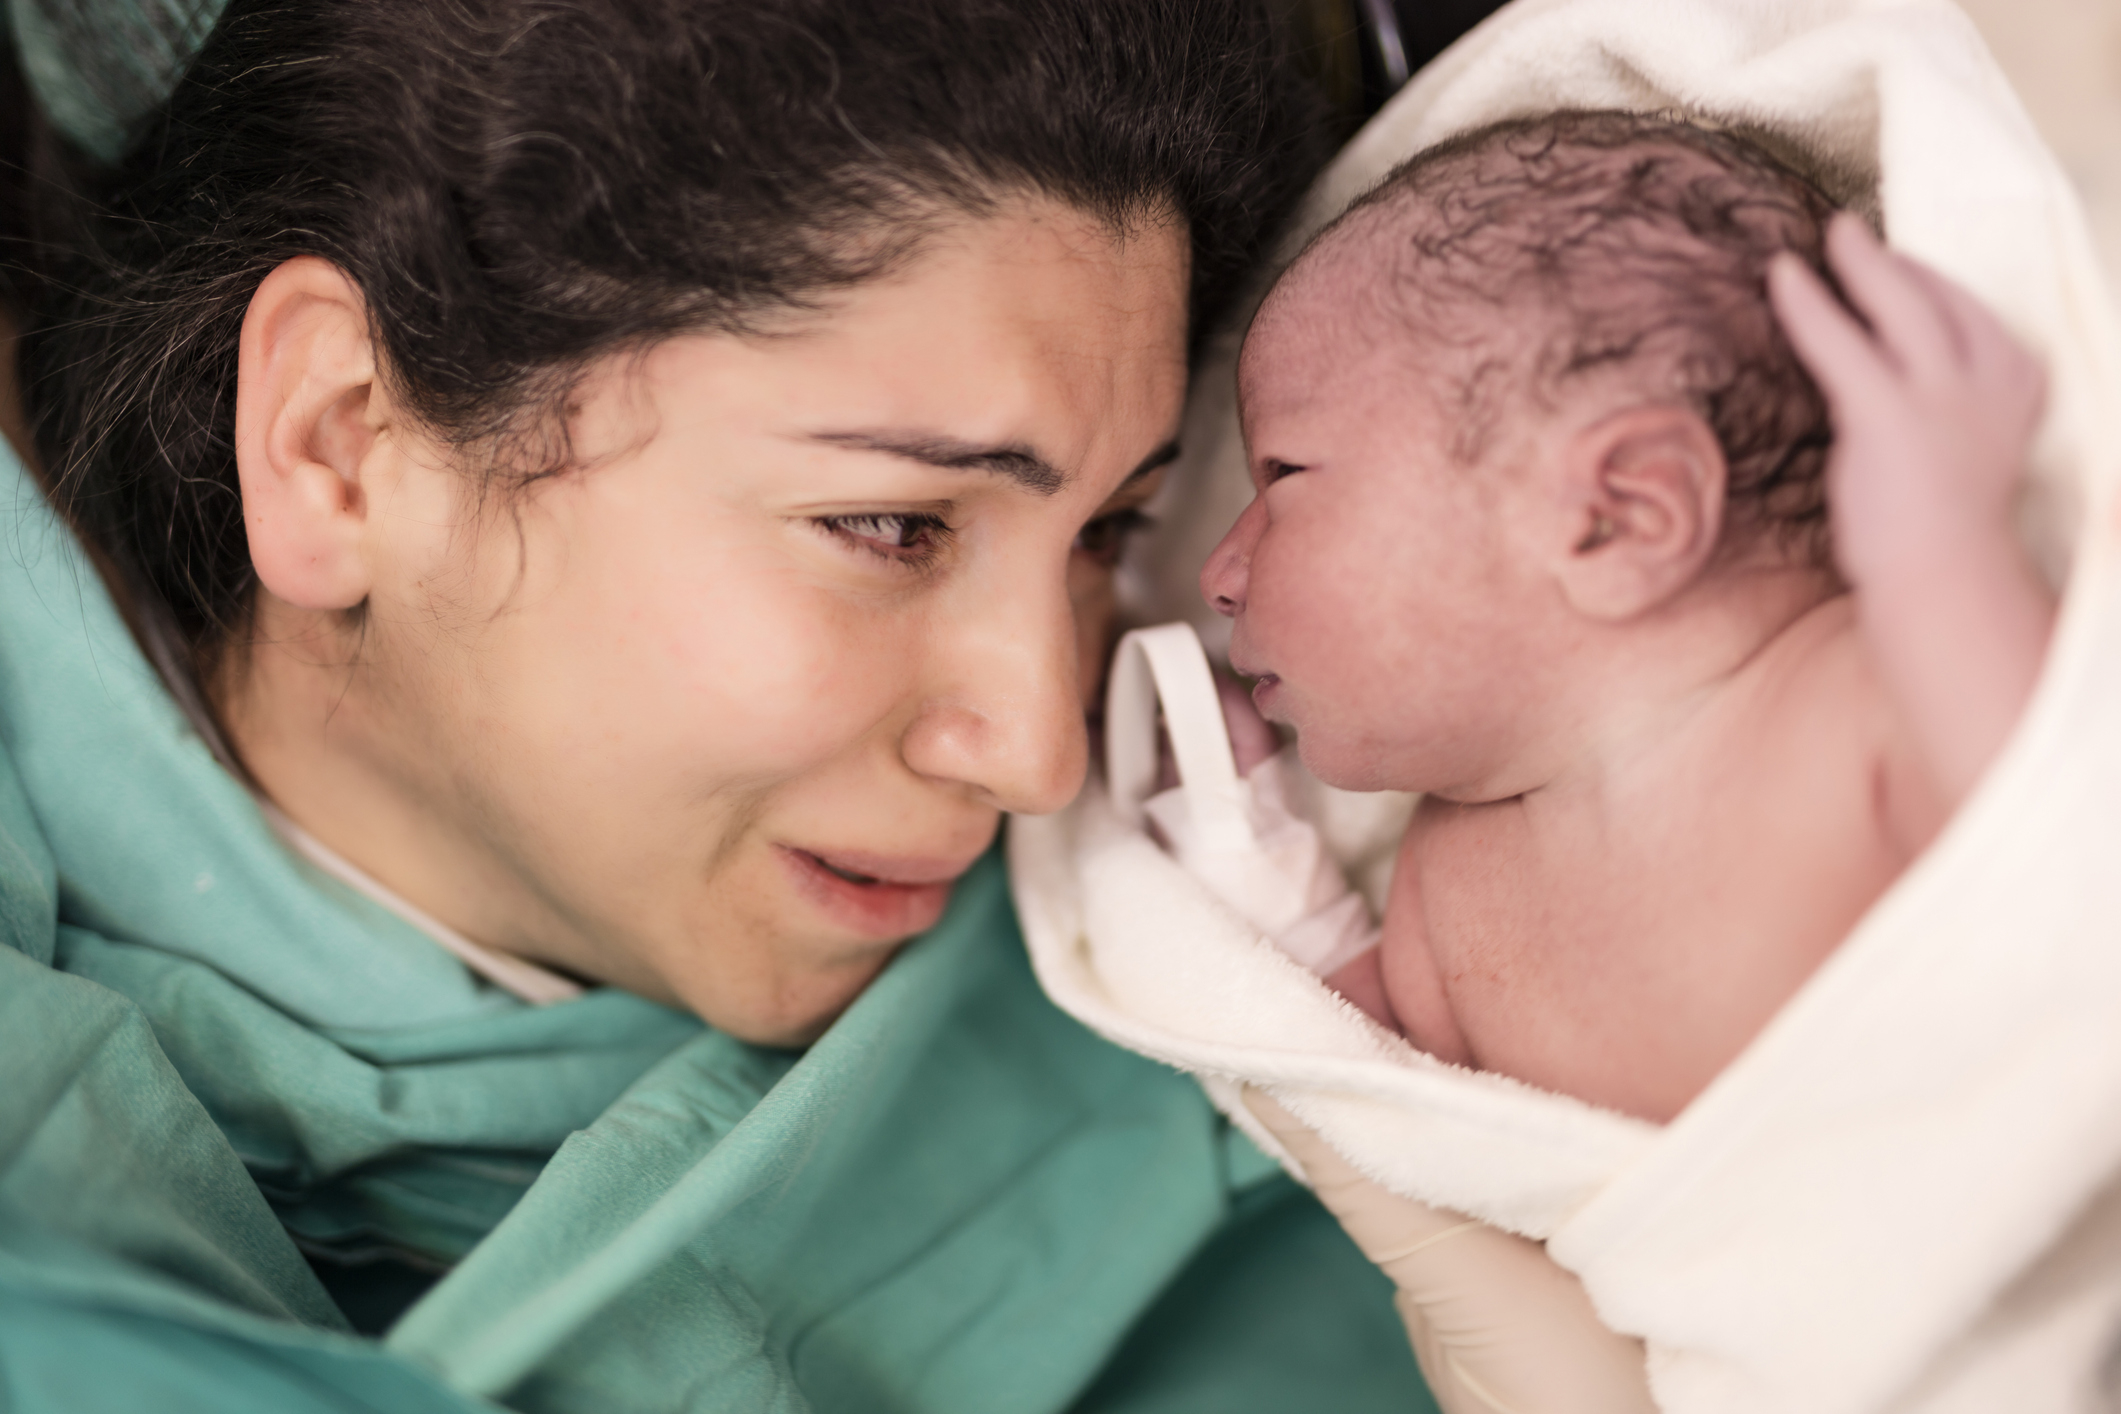 Woman holding and gazing affectionately at her newborn baby